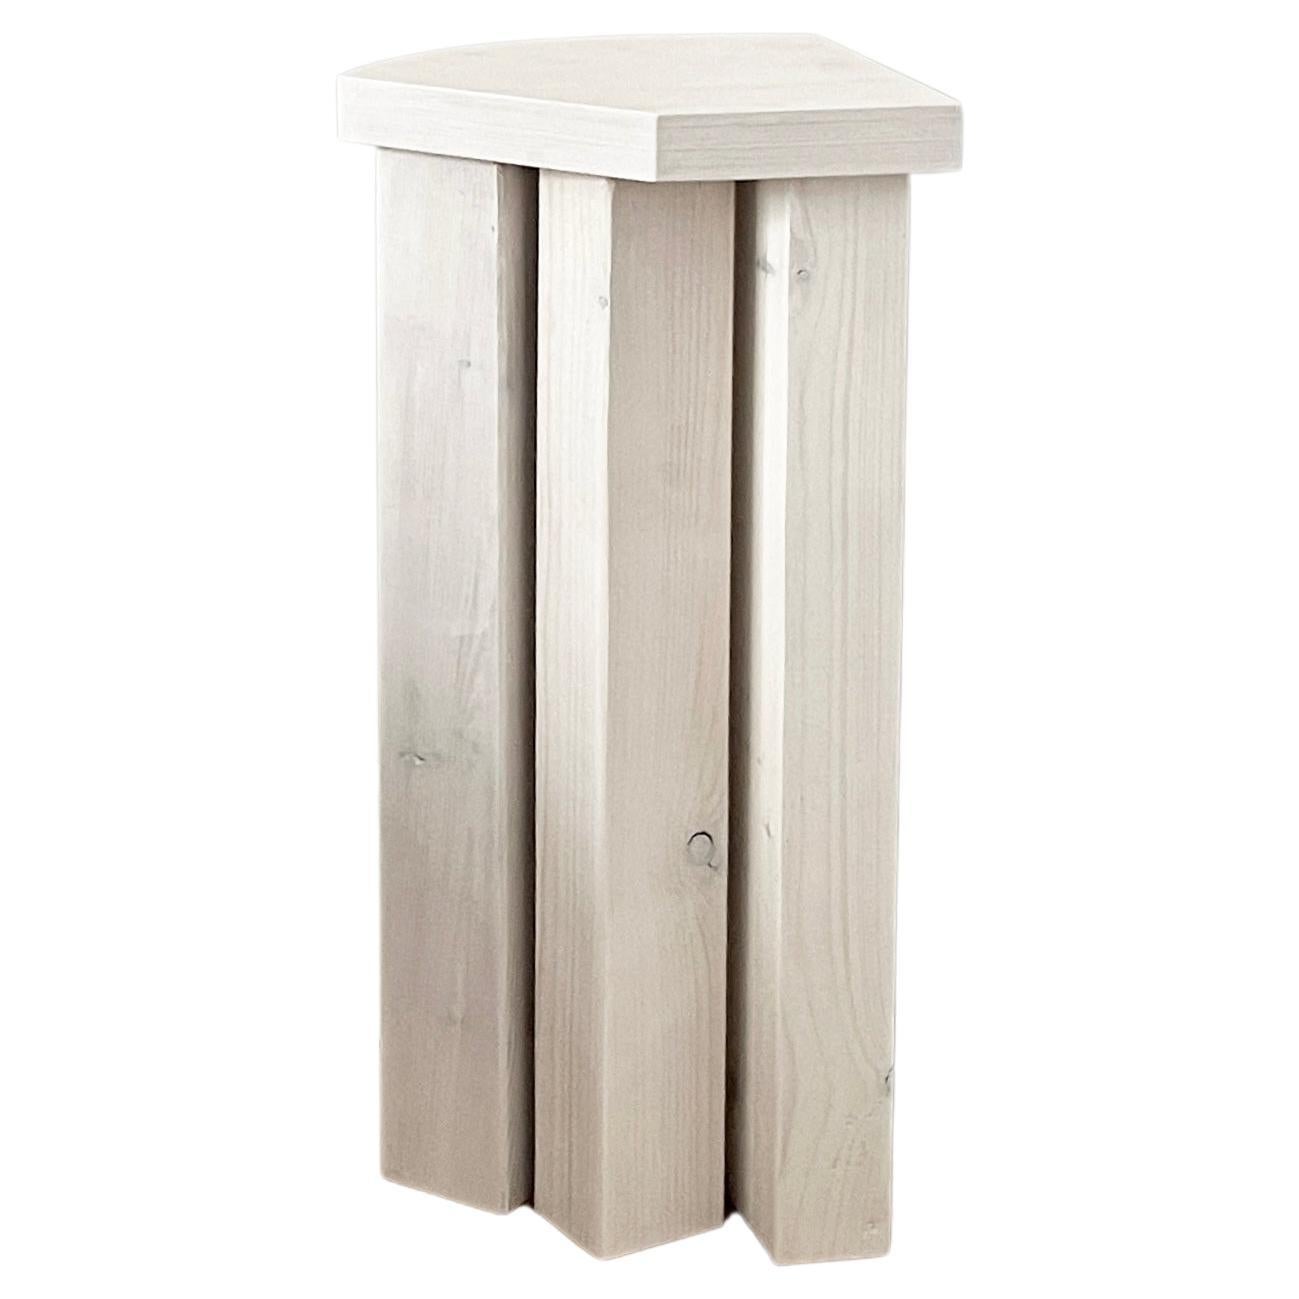 Form Entry Table is a piece from our most recent design series. This side table is made with reclaimed wood from architectural structure beams and finished with our high quality standard. From the selection of materials to final coat of finishing,